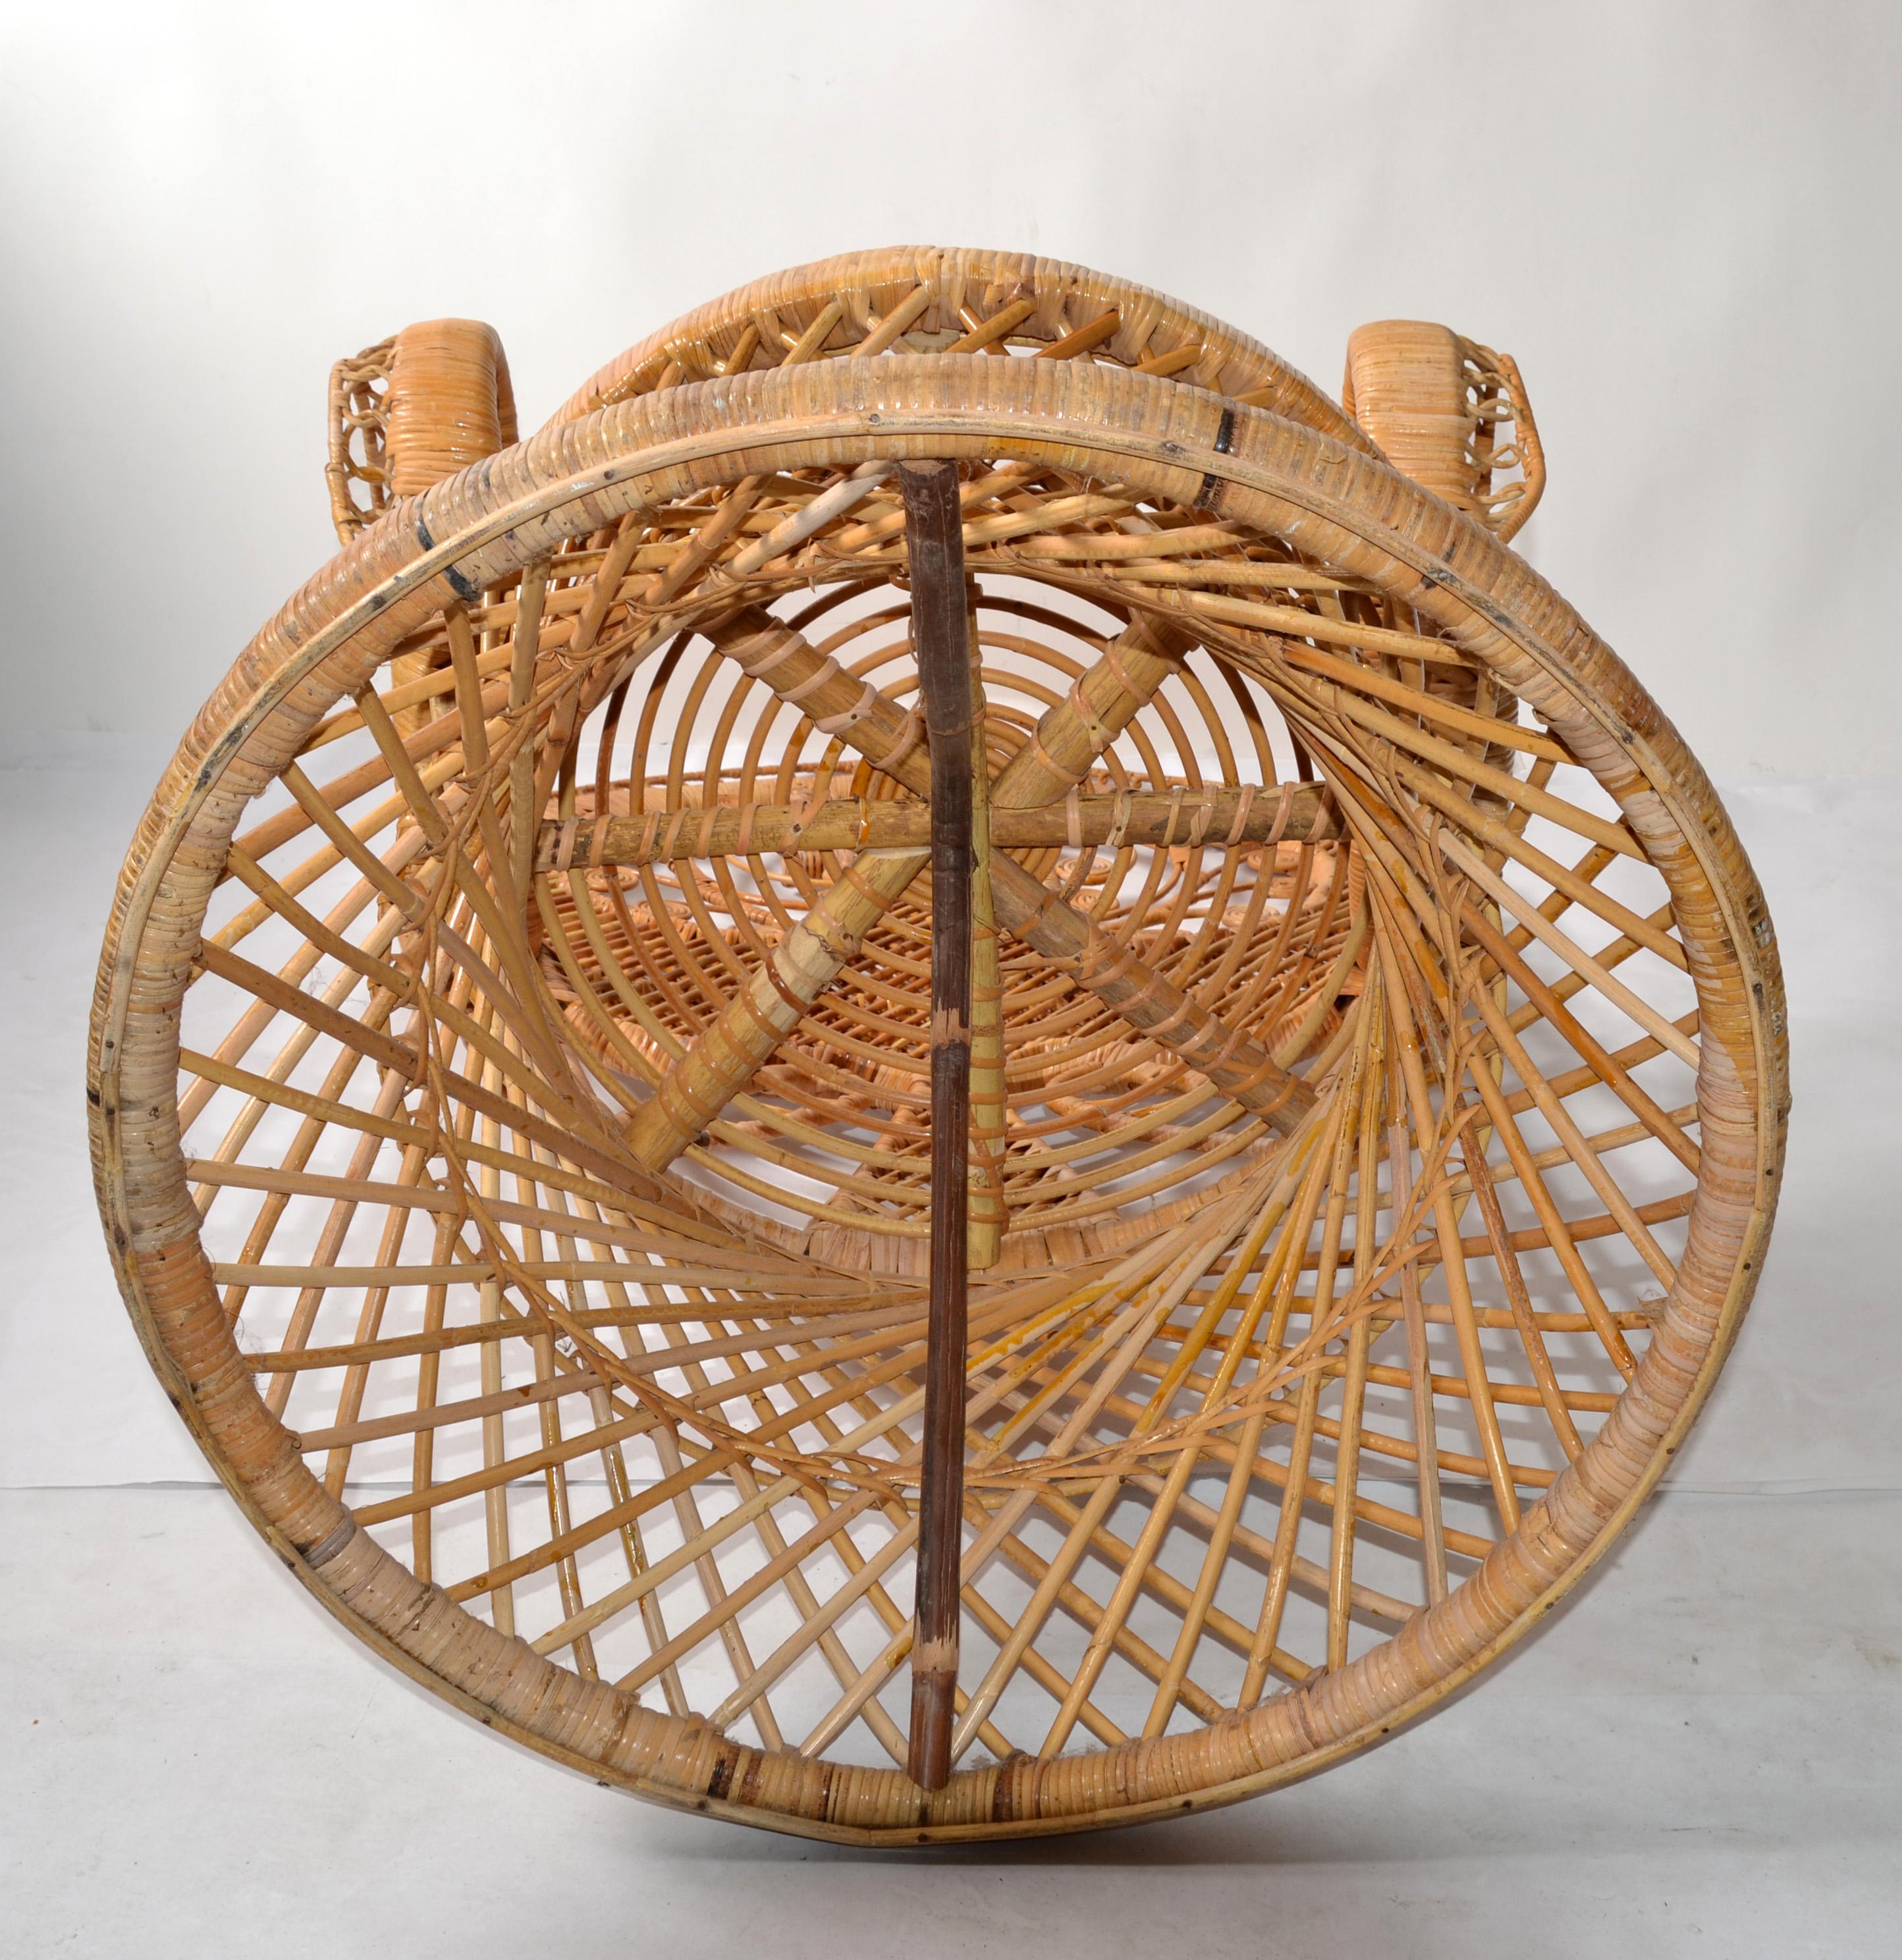 Coastal Vintage Round Rattan Accent Table Hand-Woven Wicker Caning Peacock Chair en vente 5